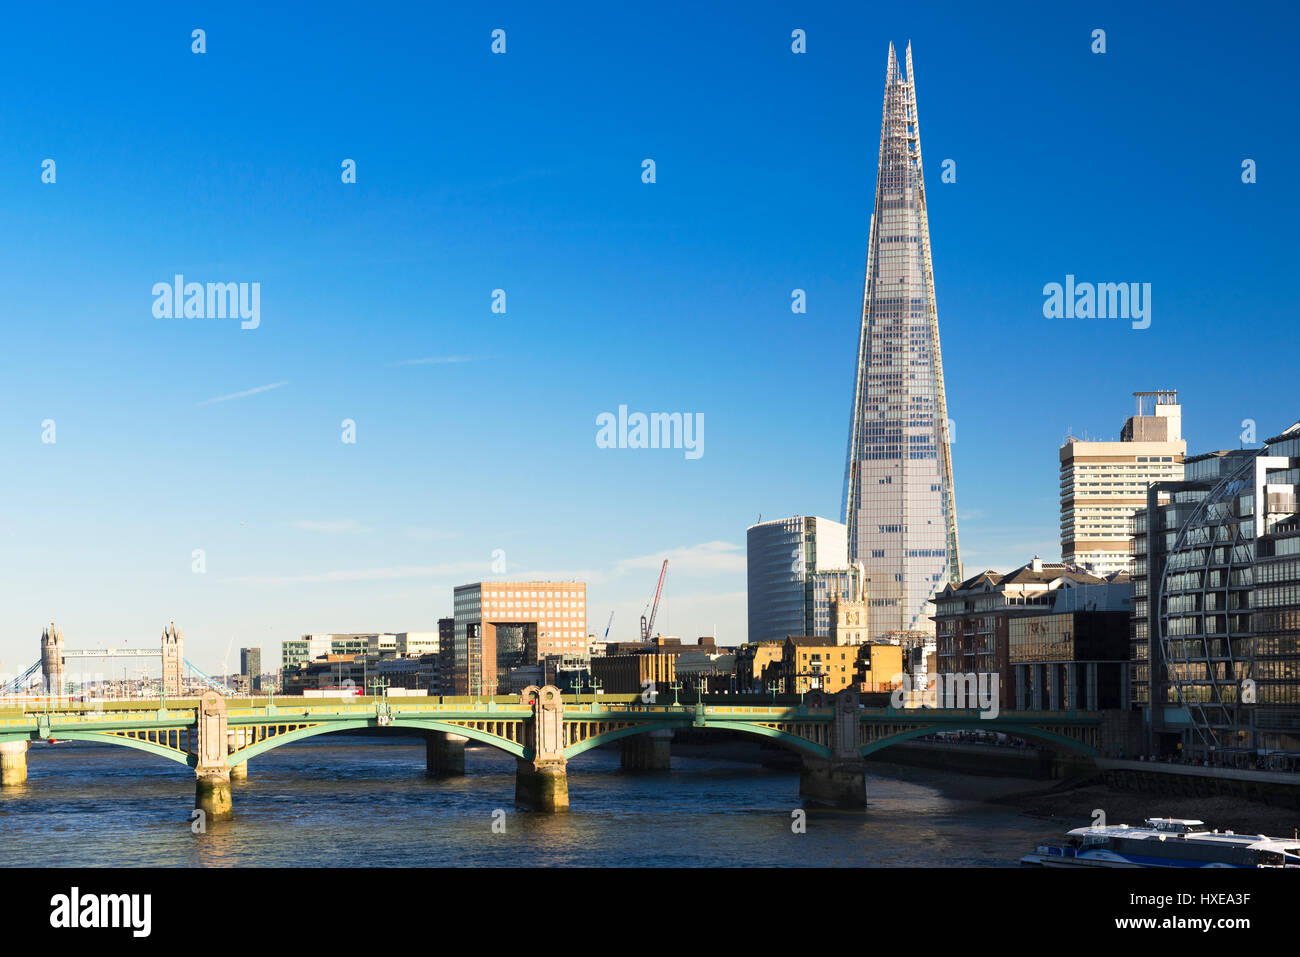 A view of the River Thames featuring The Shard (310m) with Southwark Bridge in the foreground on a bright spring afternoon, London, UK Stock Photo